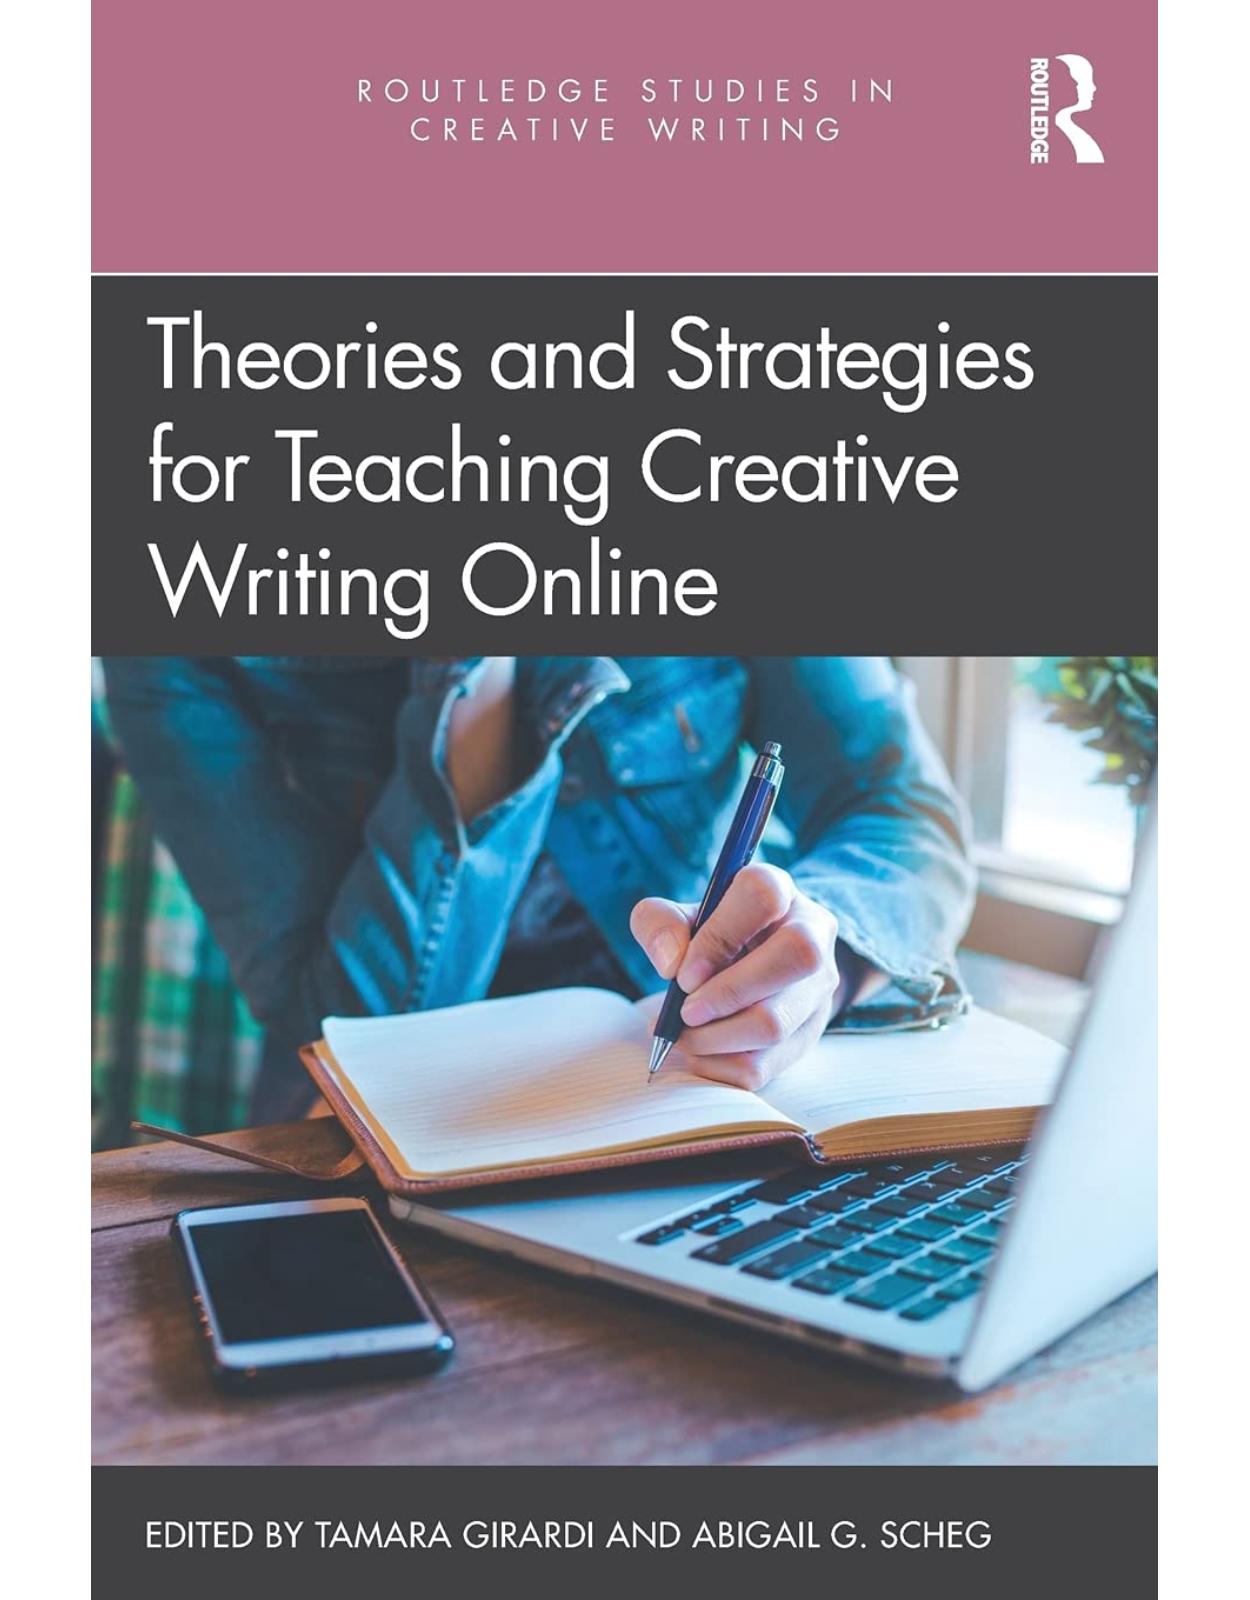 Theories and Strategies for Teaching Creative Writing Online